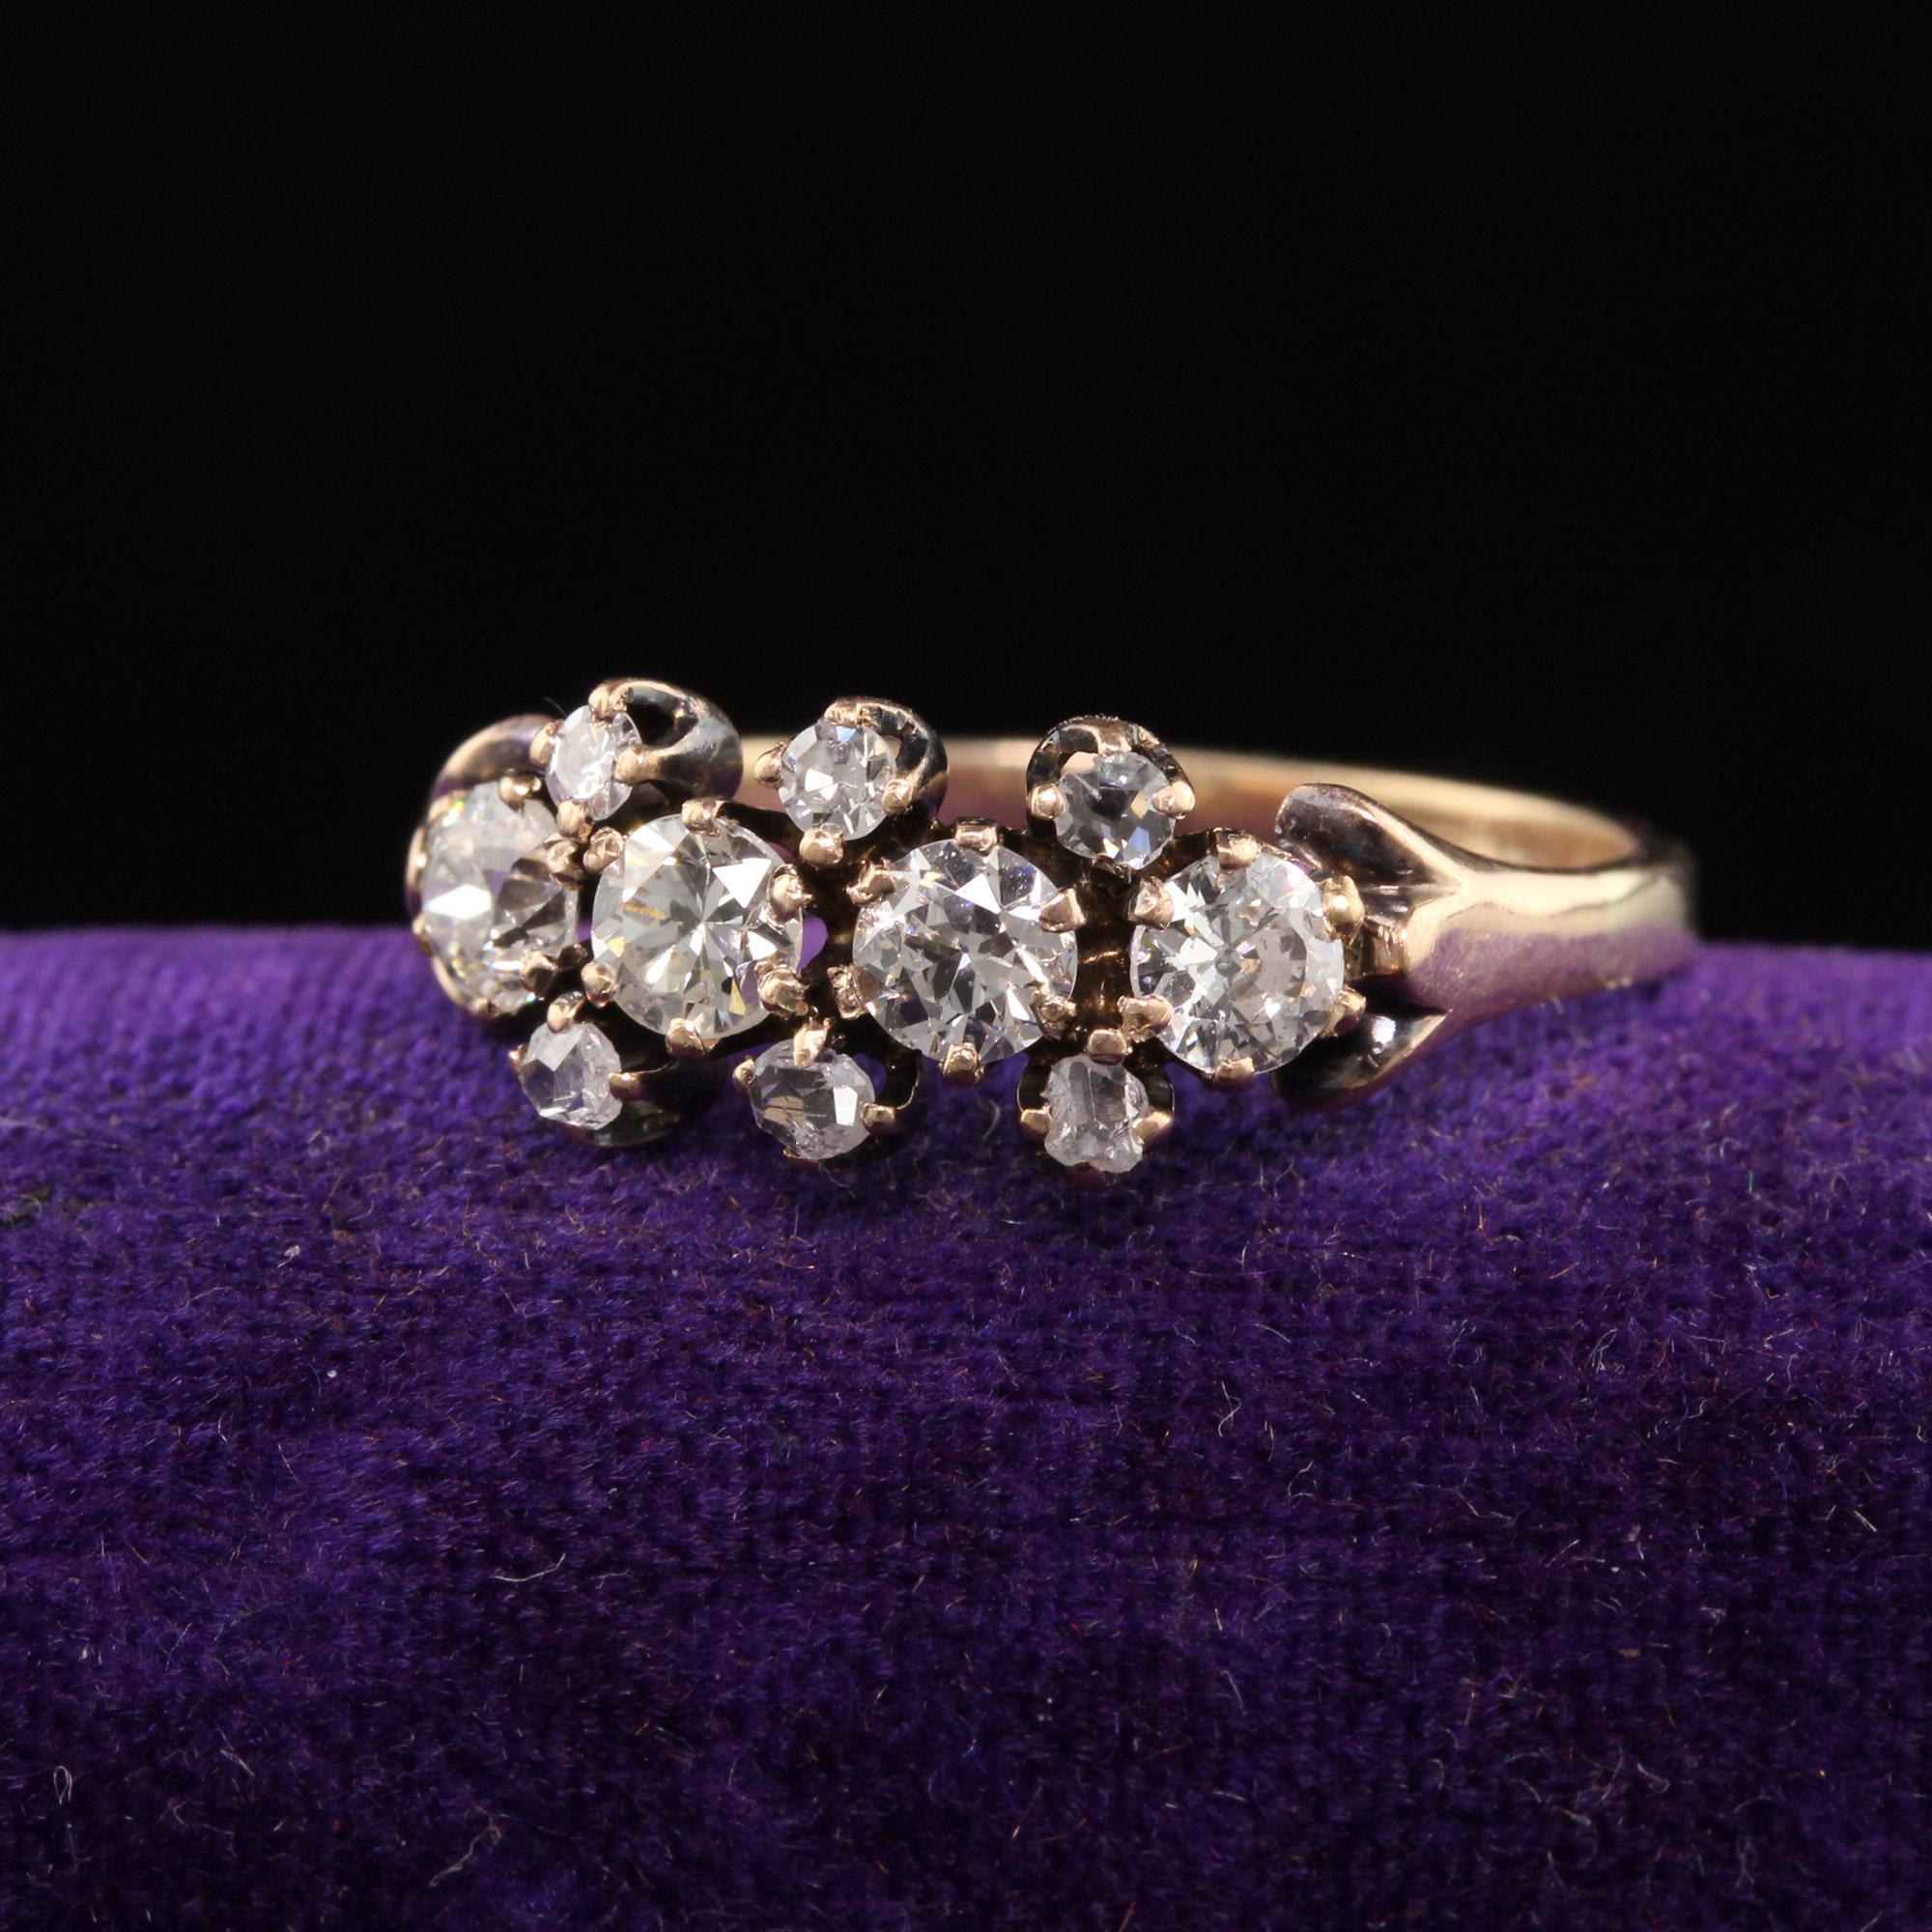 Beautiful Antique Victorian 14K Yellow Gold Old European Diamond Band. This gorgeous band has rose cut and old european cut diamonds on the top of the ring and sits low to the finger.

Item #R1079

Metal: 14K Yellow Gold

Weight: 1.7 Grams

Size: 6